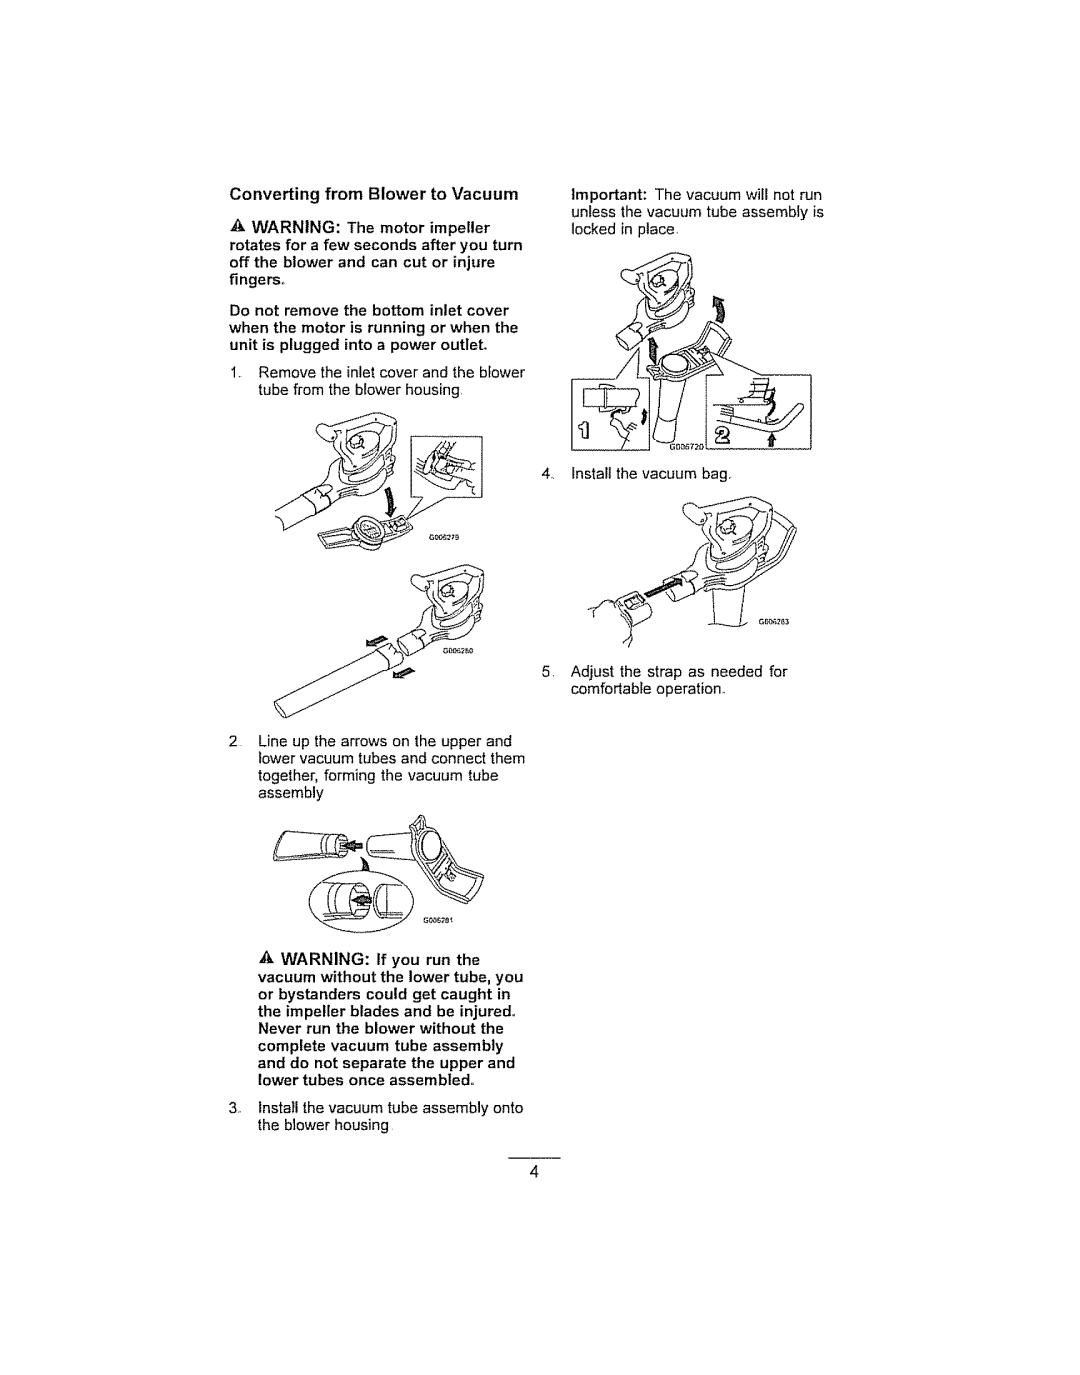 Craftsman 280030785 Converting from Blower to Vacuum, or bystanders could get caught in, Never run the blower without the 